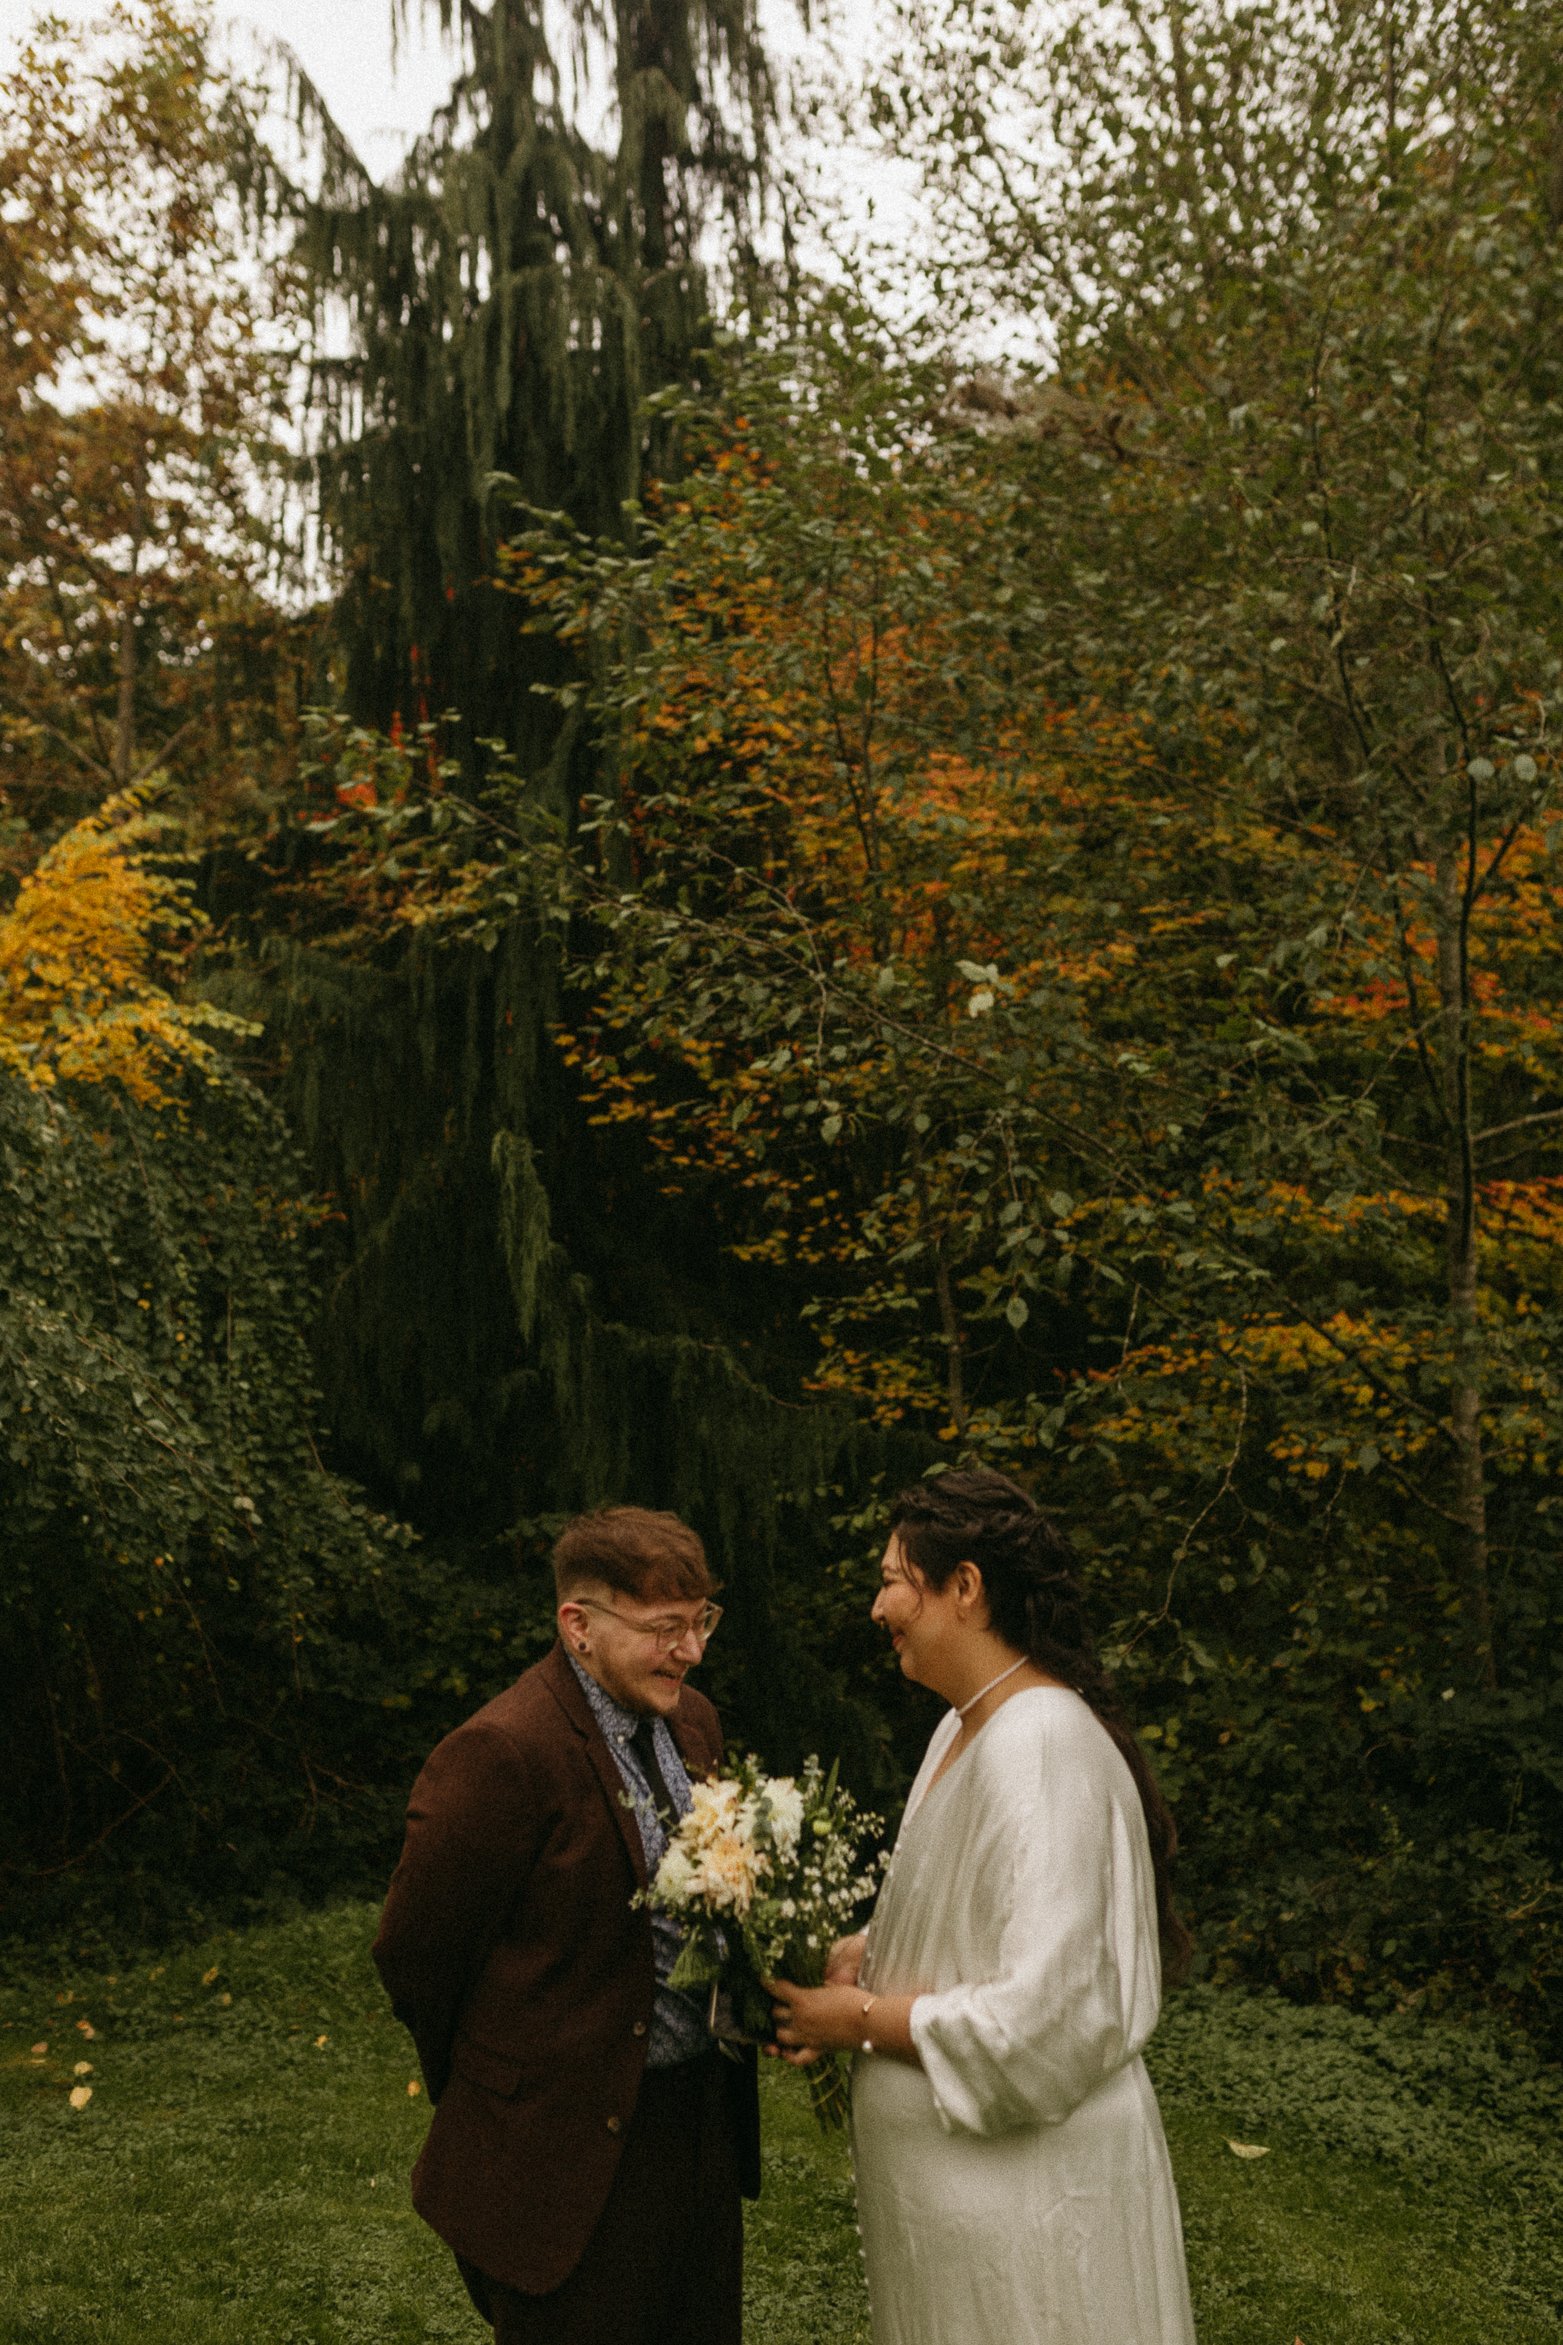 t4t-trans-non-binary-seaside-queer-intimate-wedding-washington-by-genderqueer-elopement-photographer-halle-roland-97.jpg